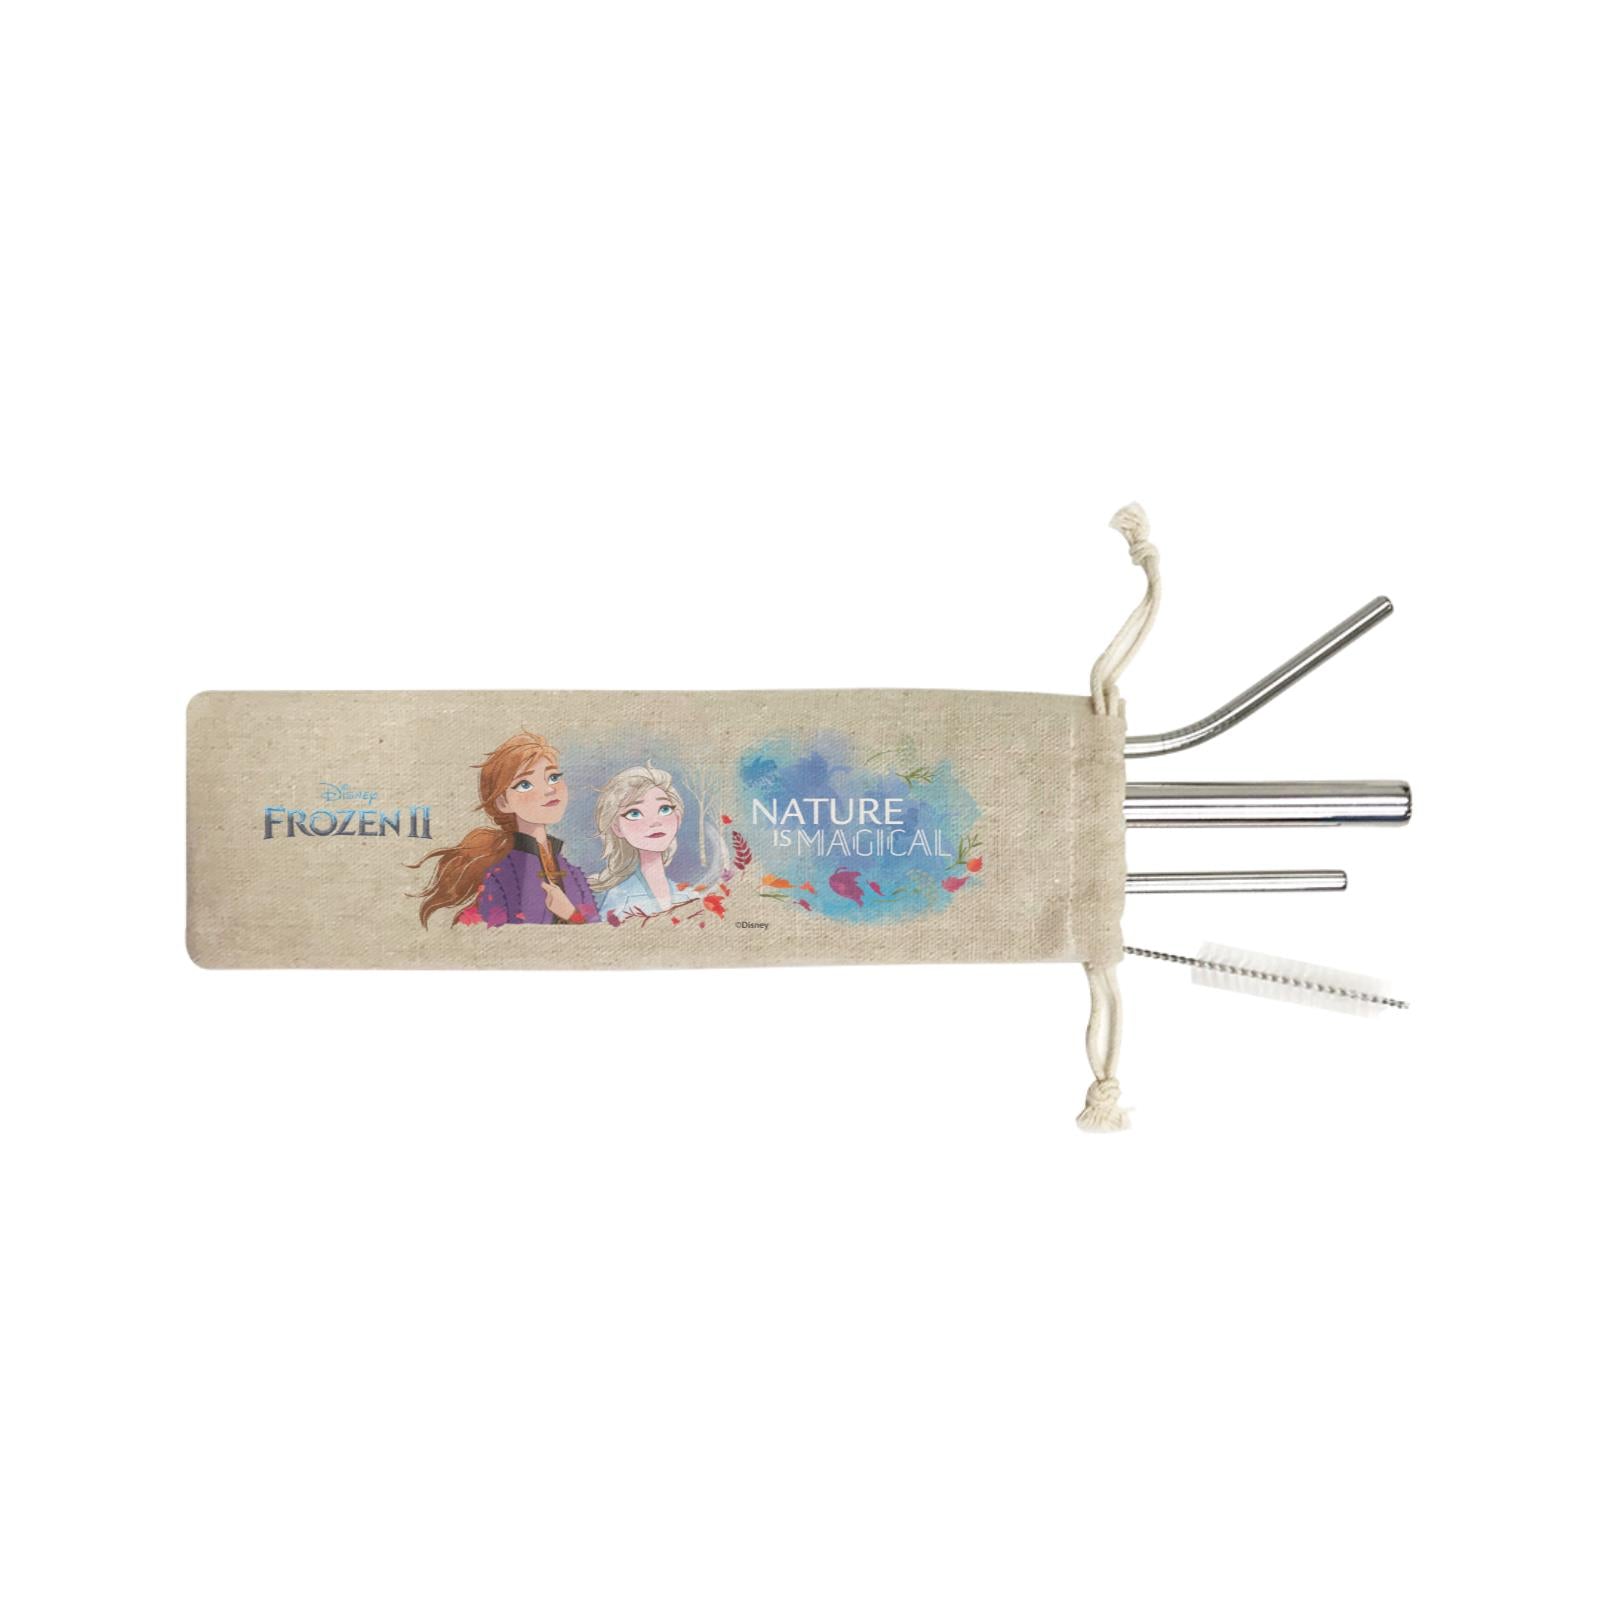 Disney Frozen 2 Snowflake Nature Is Magical With Elsa And Anna 4-in-1 Strawset In a Satchel